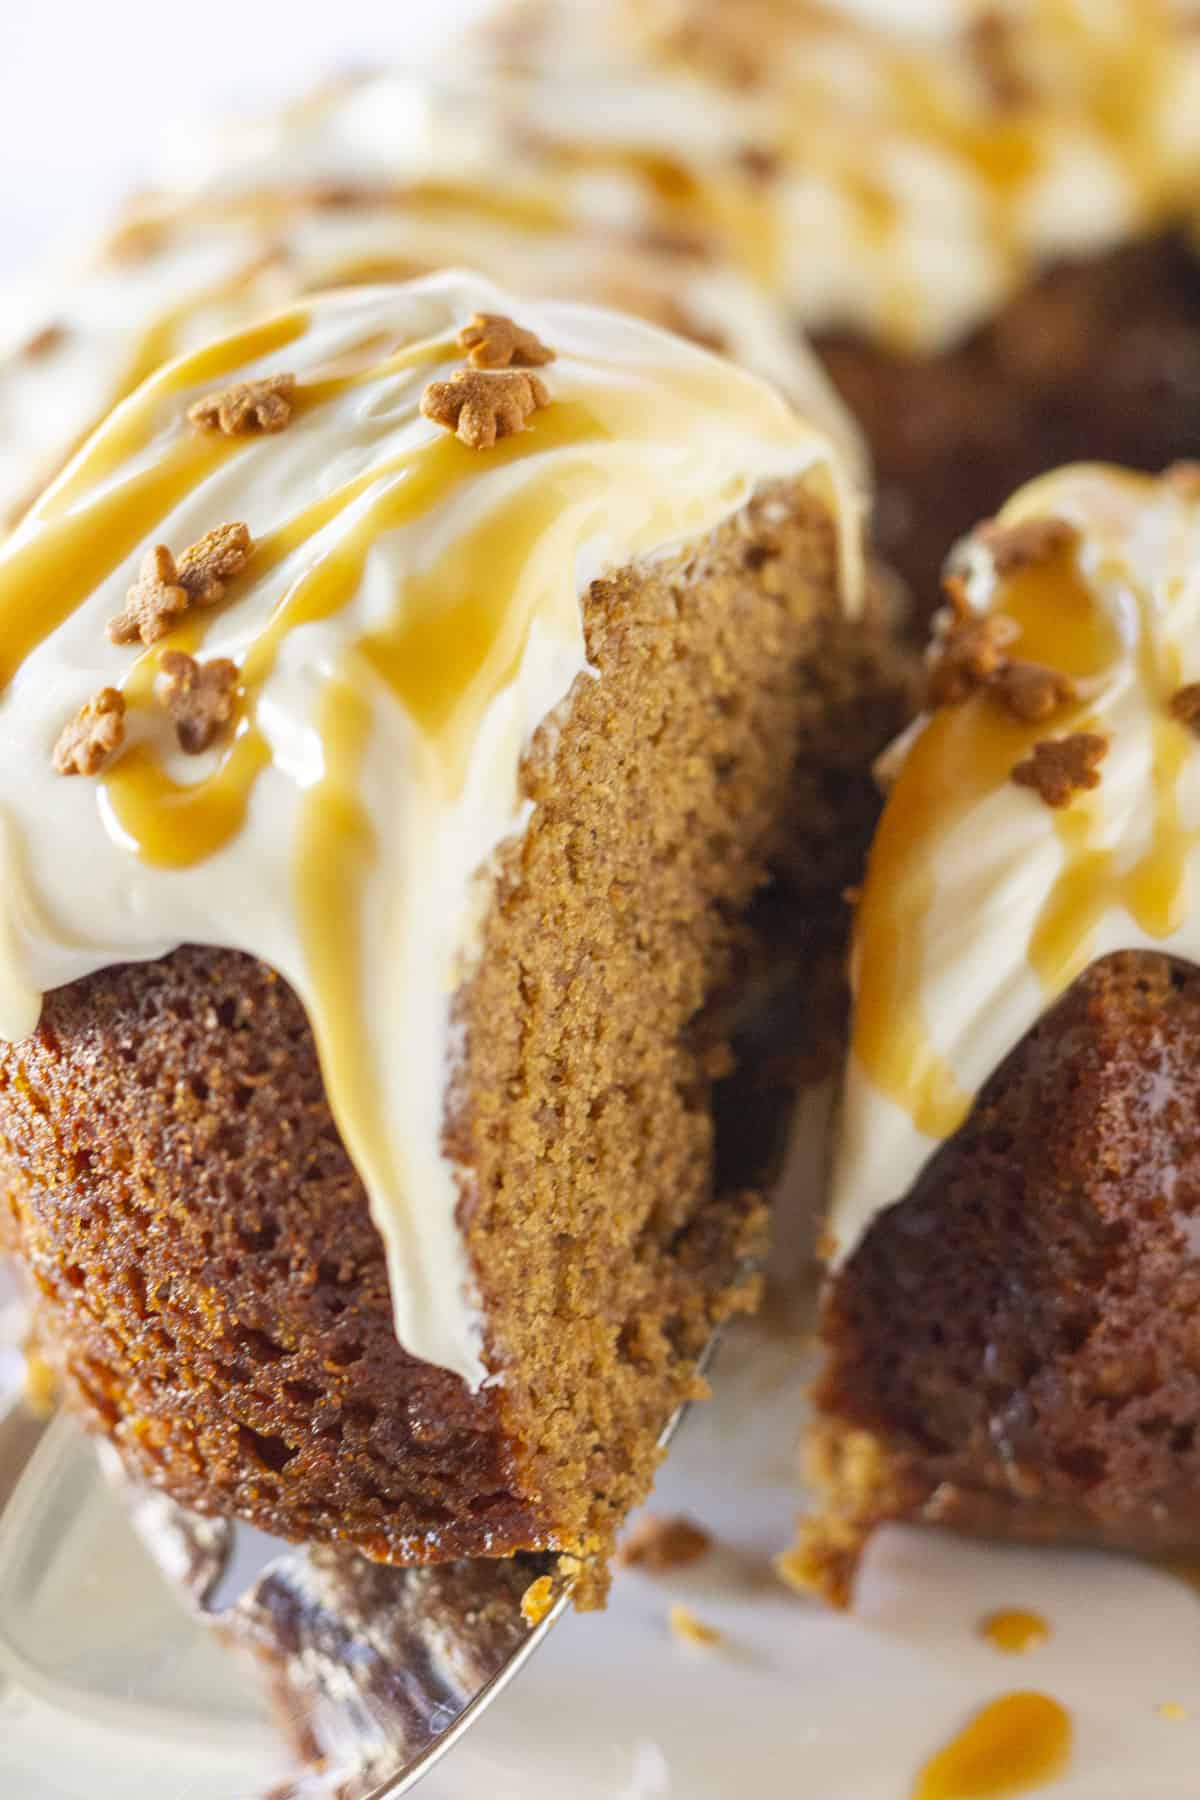 Gingerbread Bundt Cake (with Eggnog Whipped Cream) - A Beautiful Plate